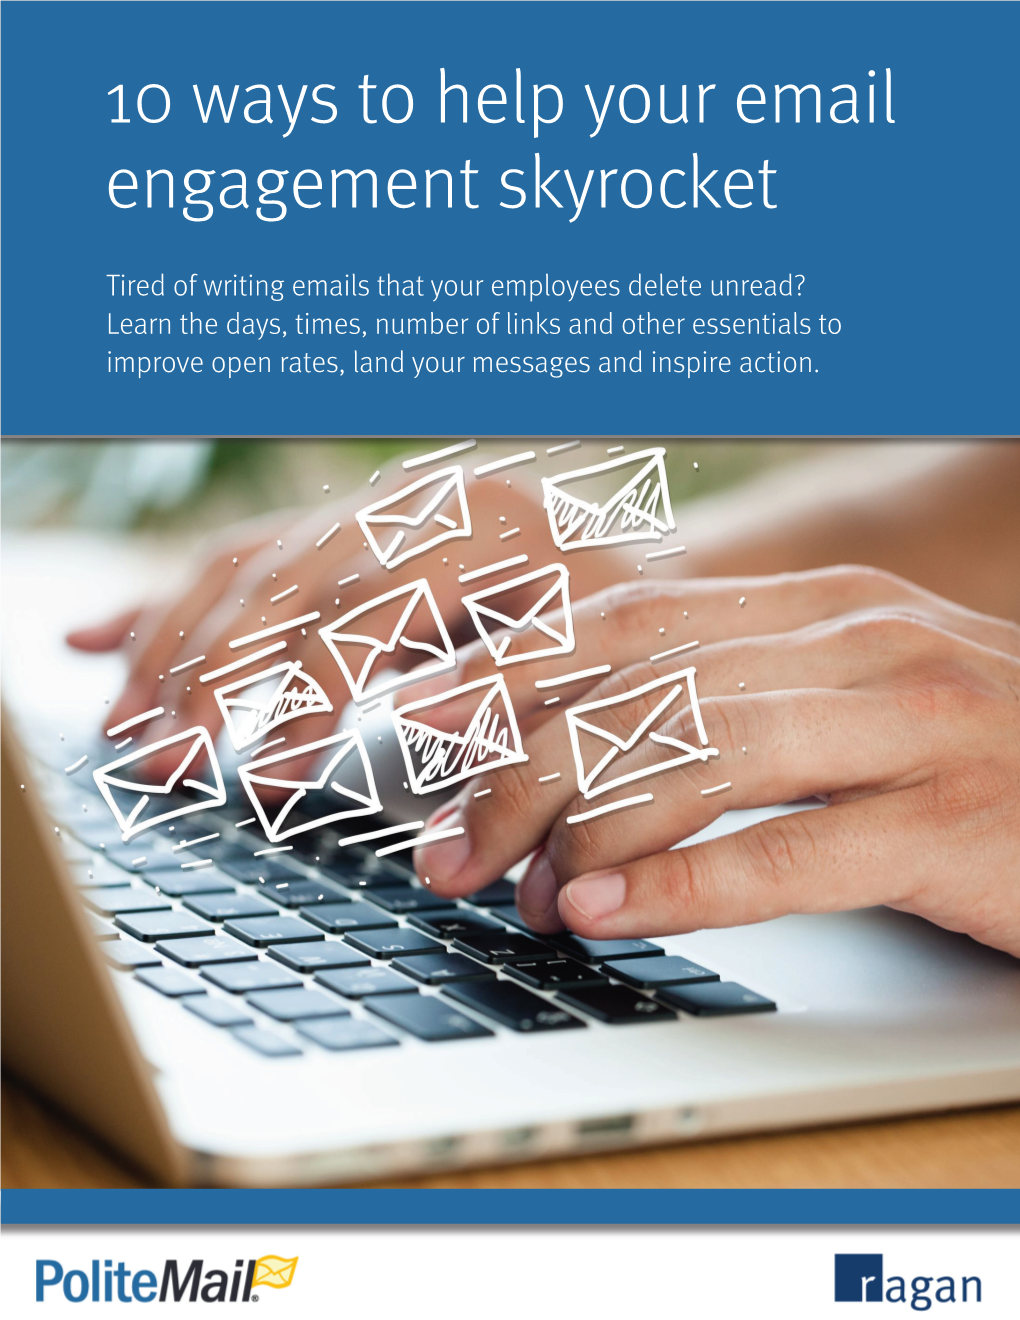 10 Ways to Help Your Email Engagement Skyrocket